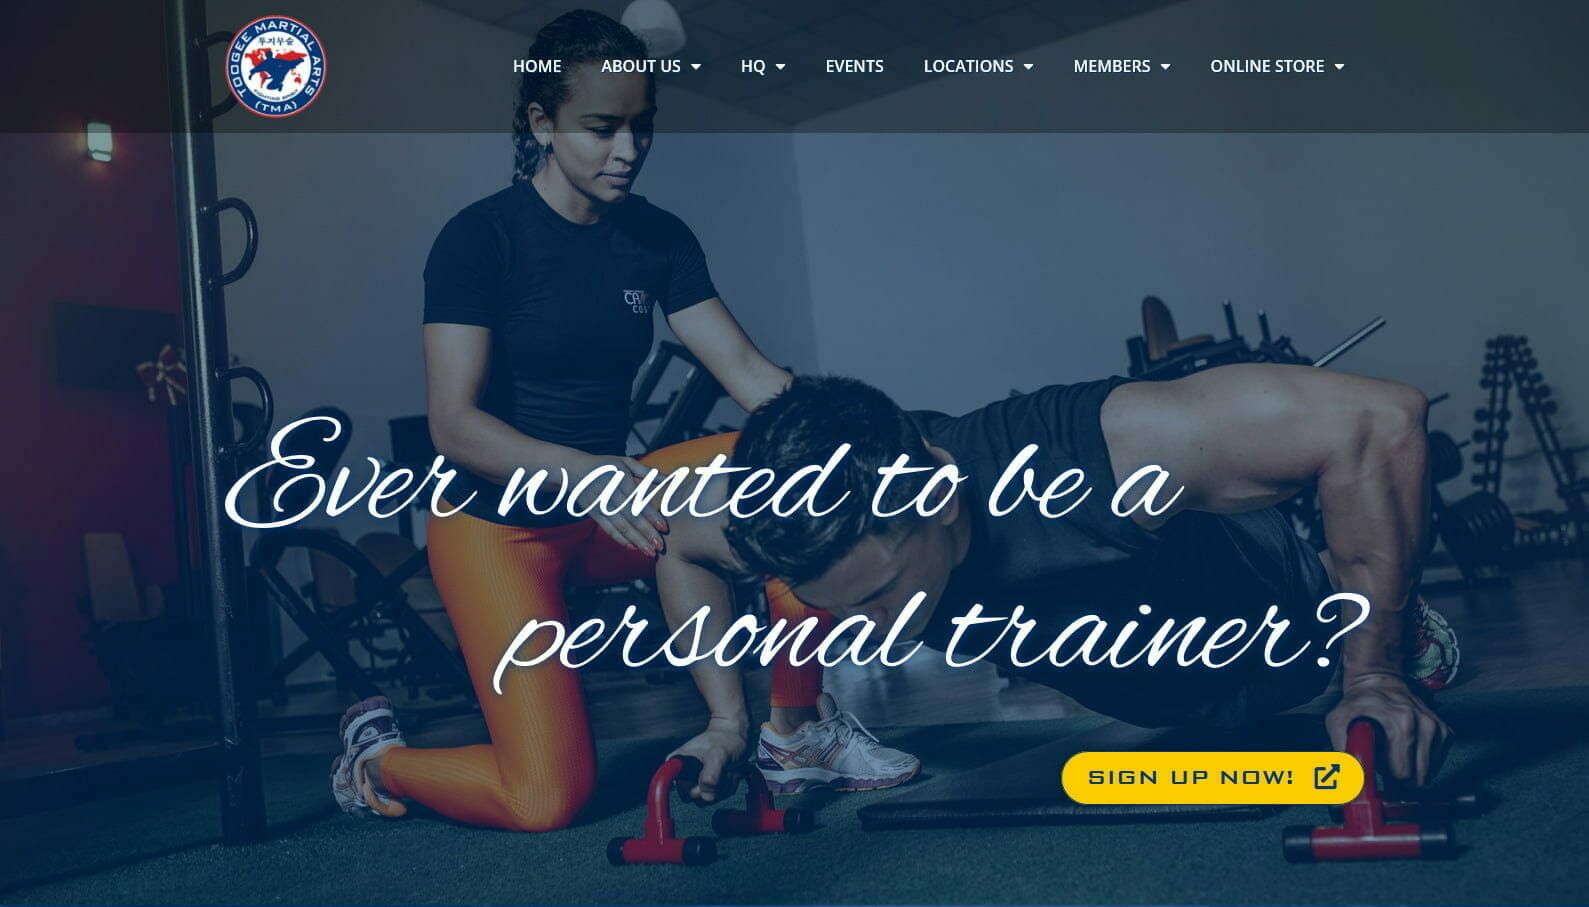 Web Design & Development of the Toogee Martial Arts Personal Training Course Landing Page